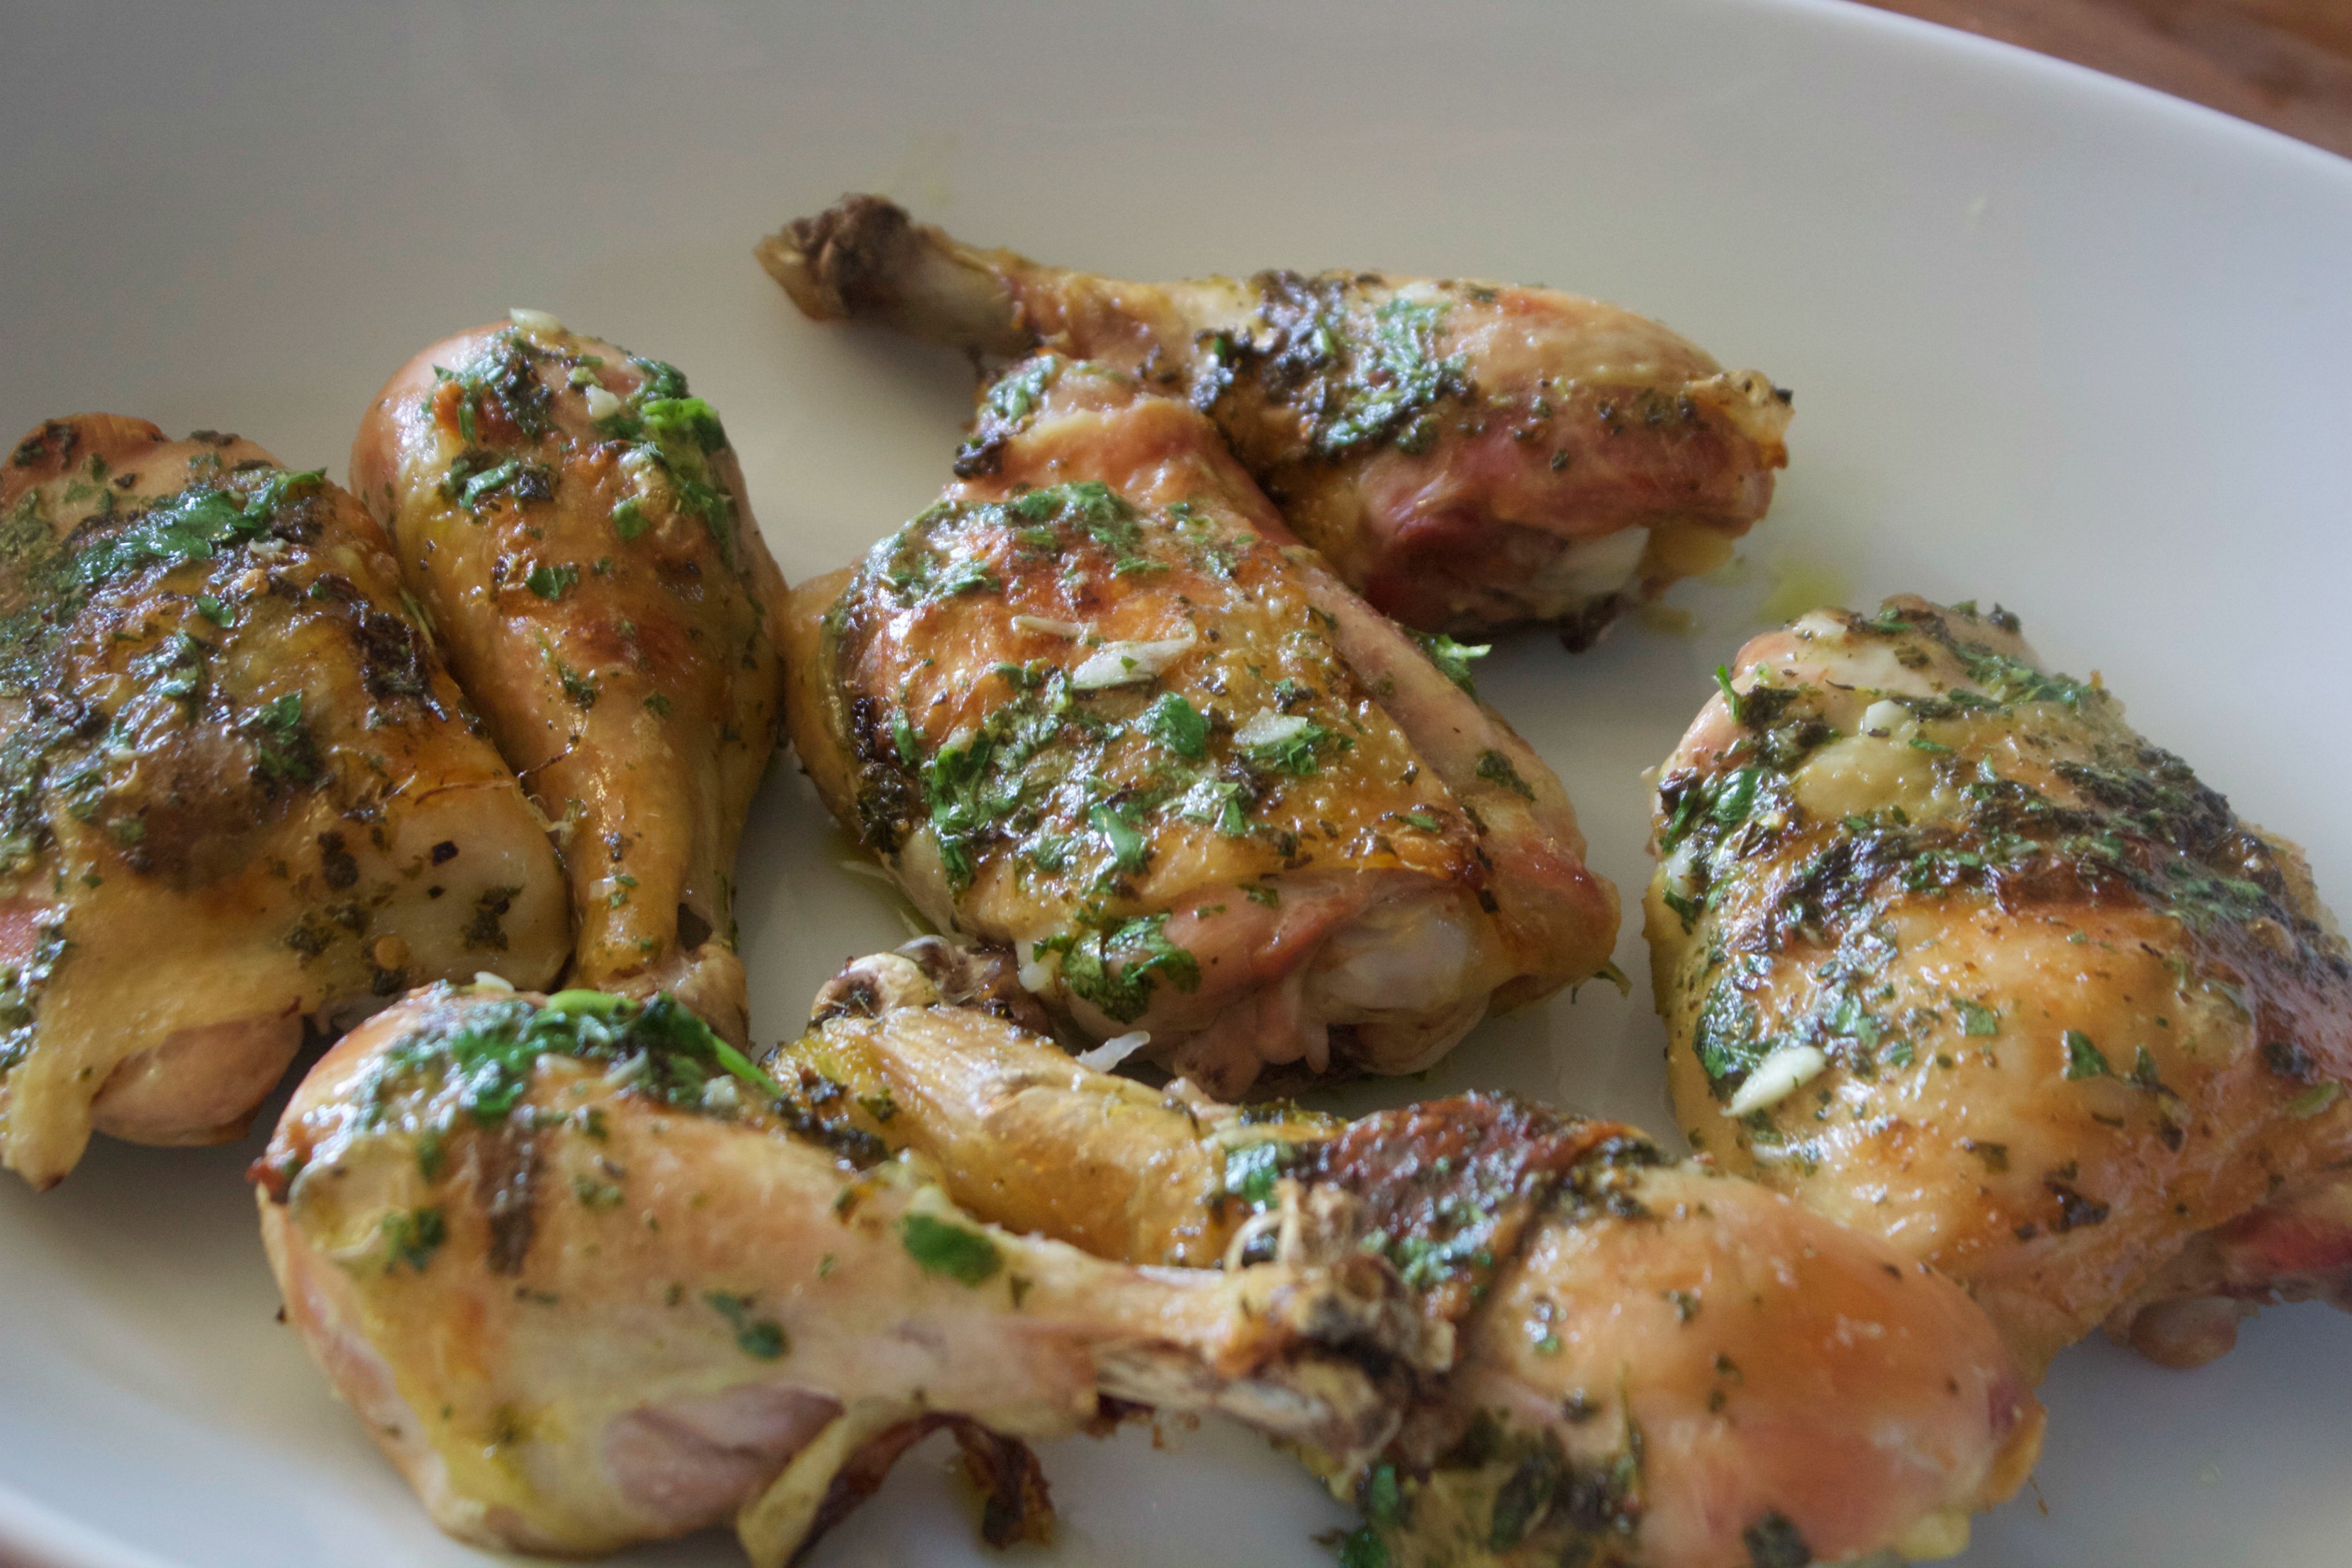 Chimichurri chicken is packed with delicious flavor and herbs and makes a great weeknight meal.